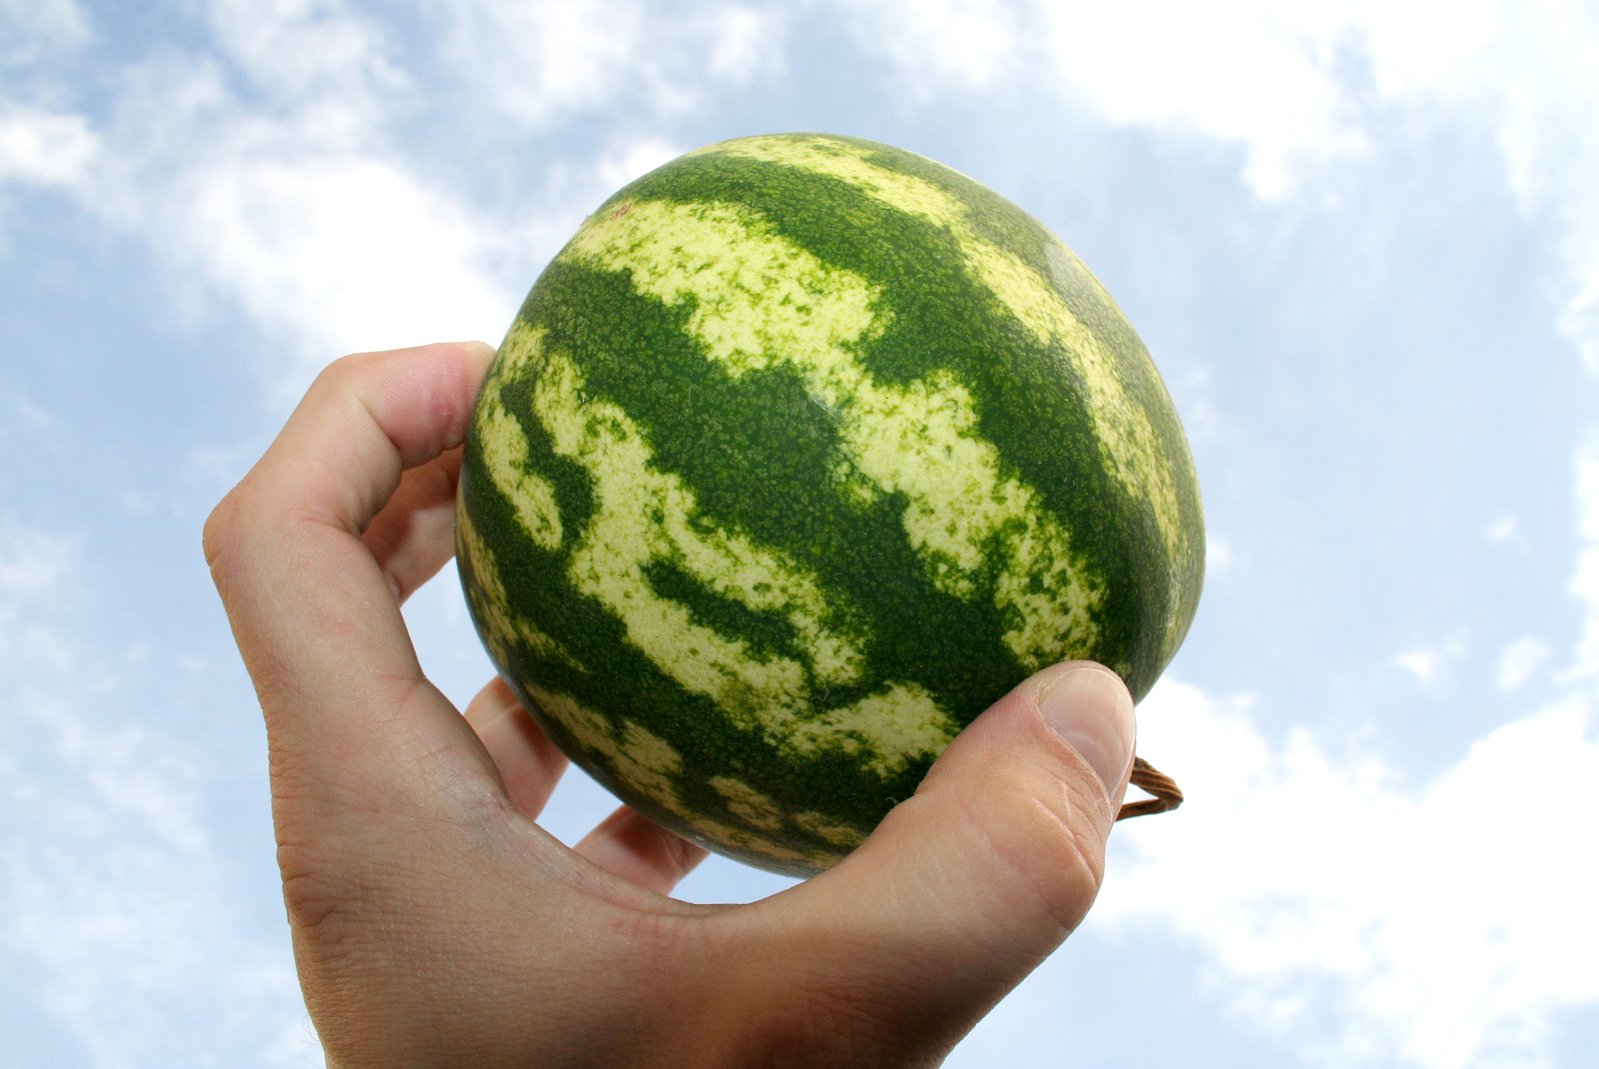 hand holding a whole watermelon in the sky